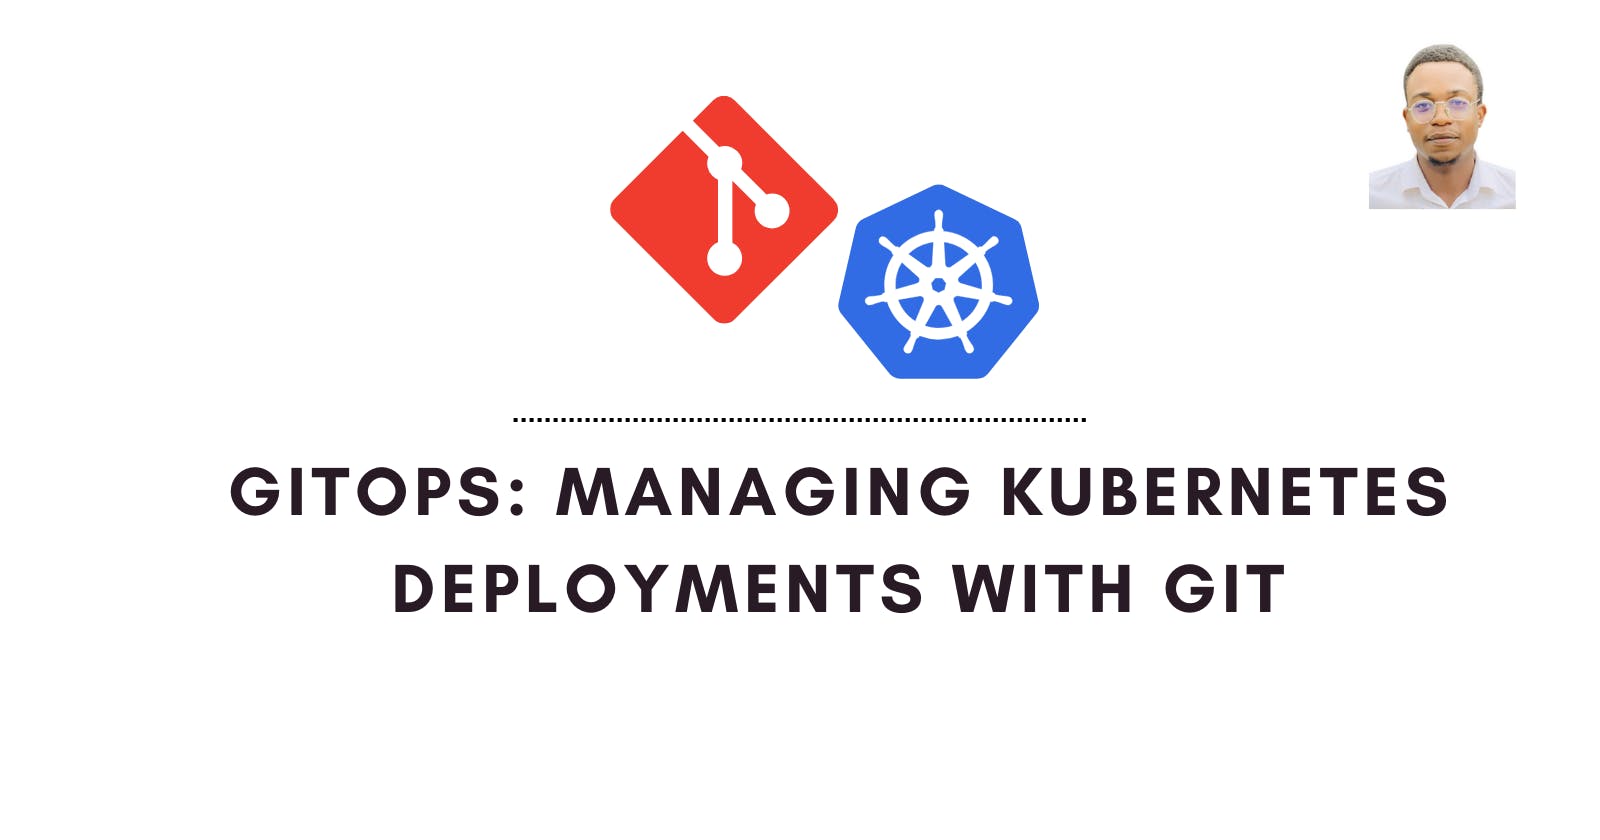 GitOps: Managing Kubernetes Deployments with Git